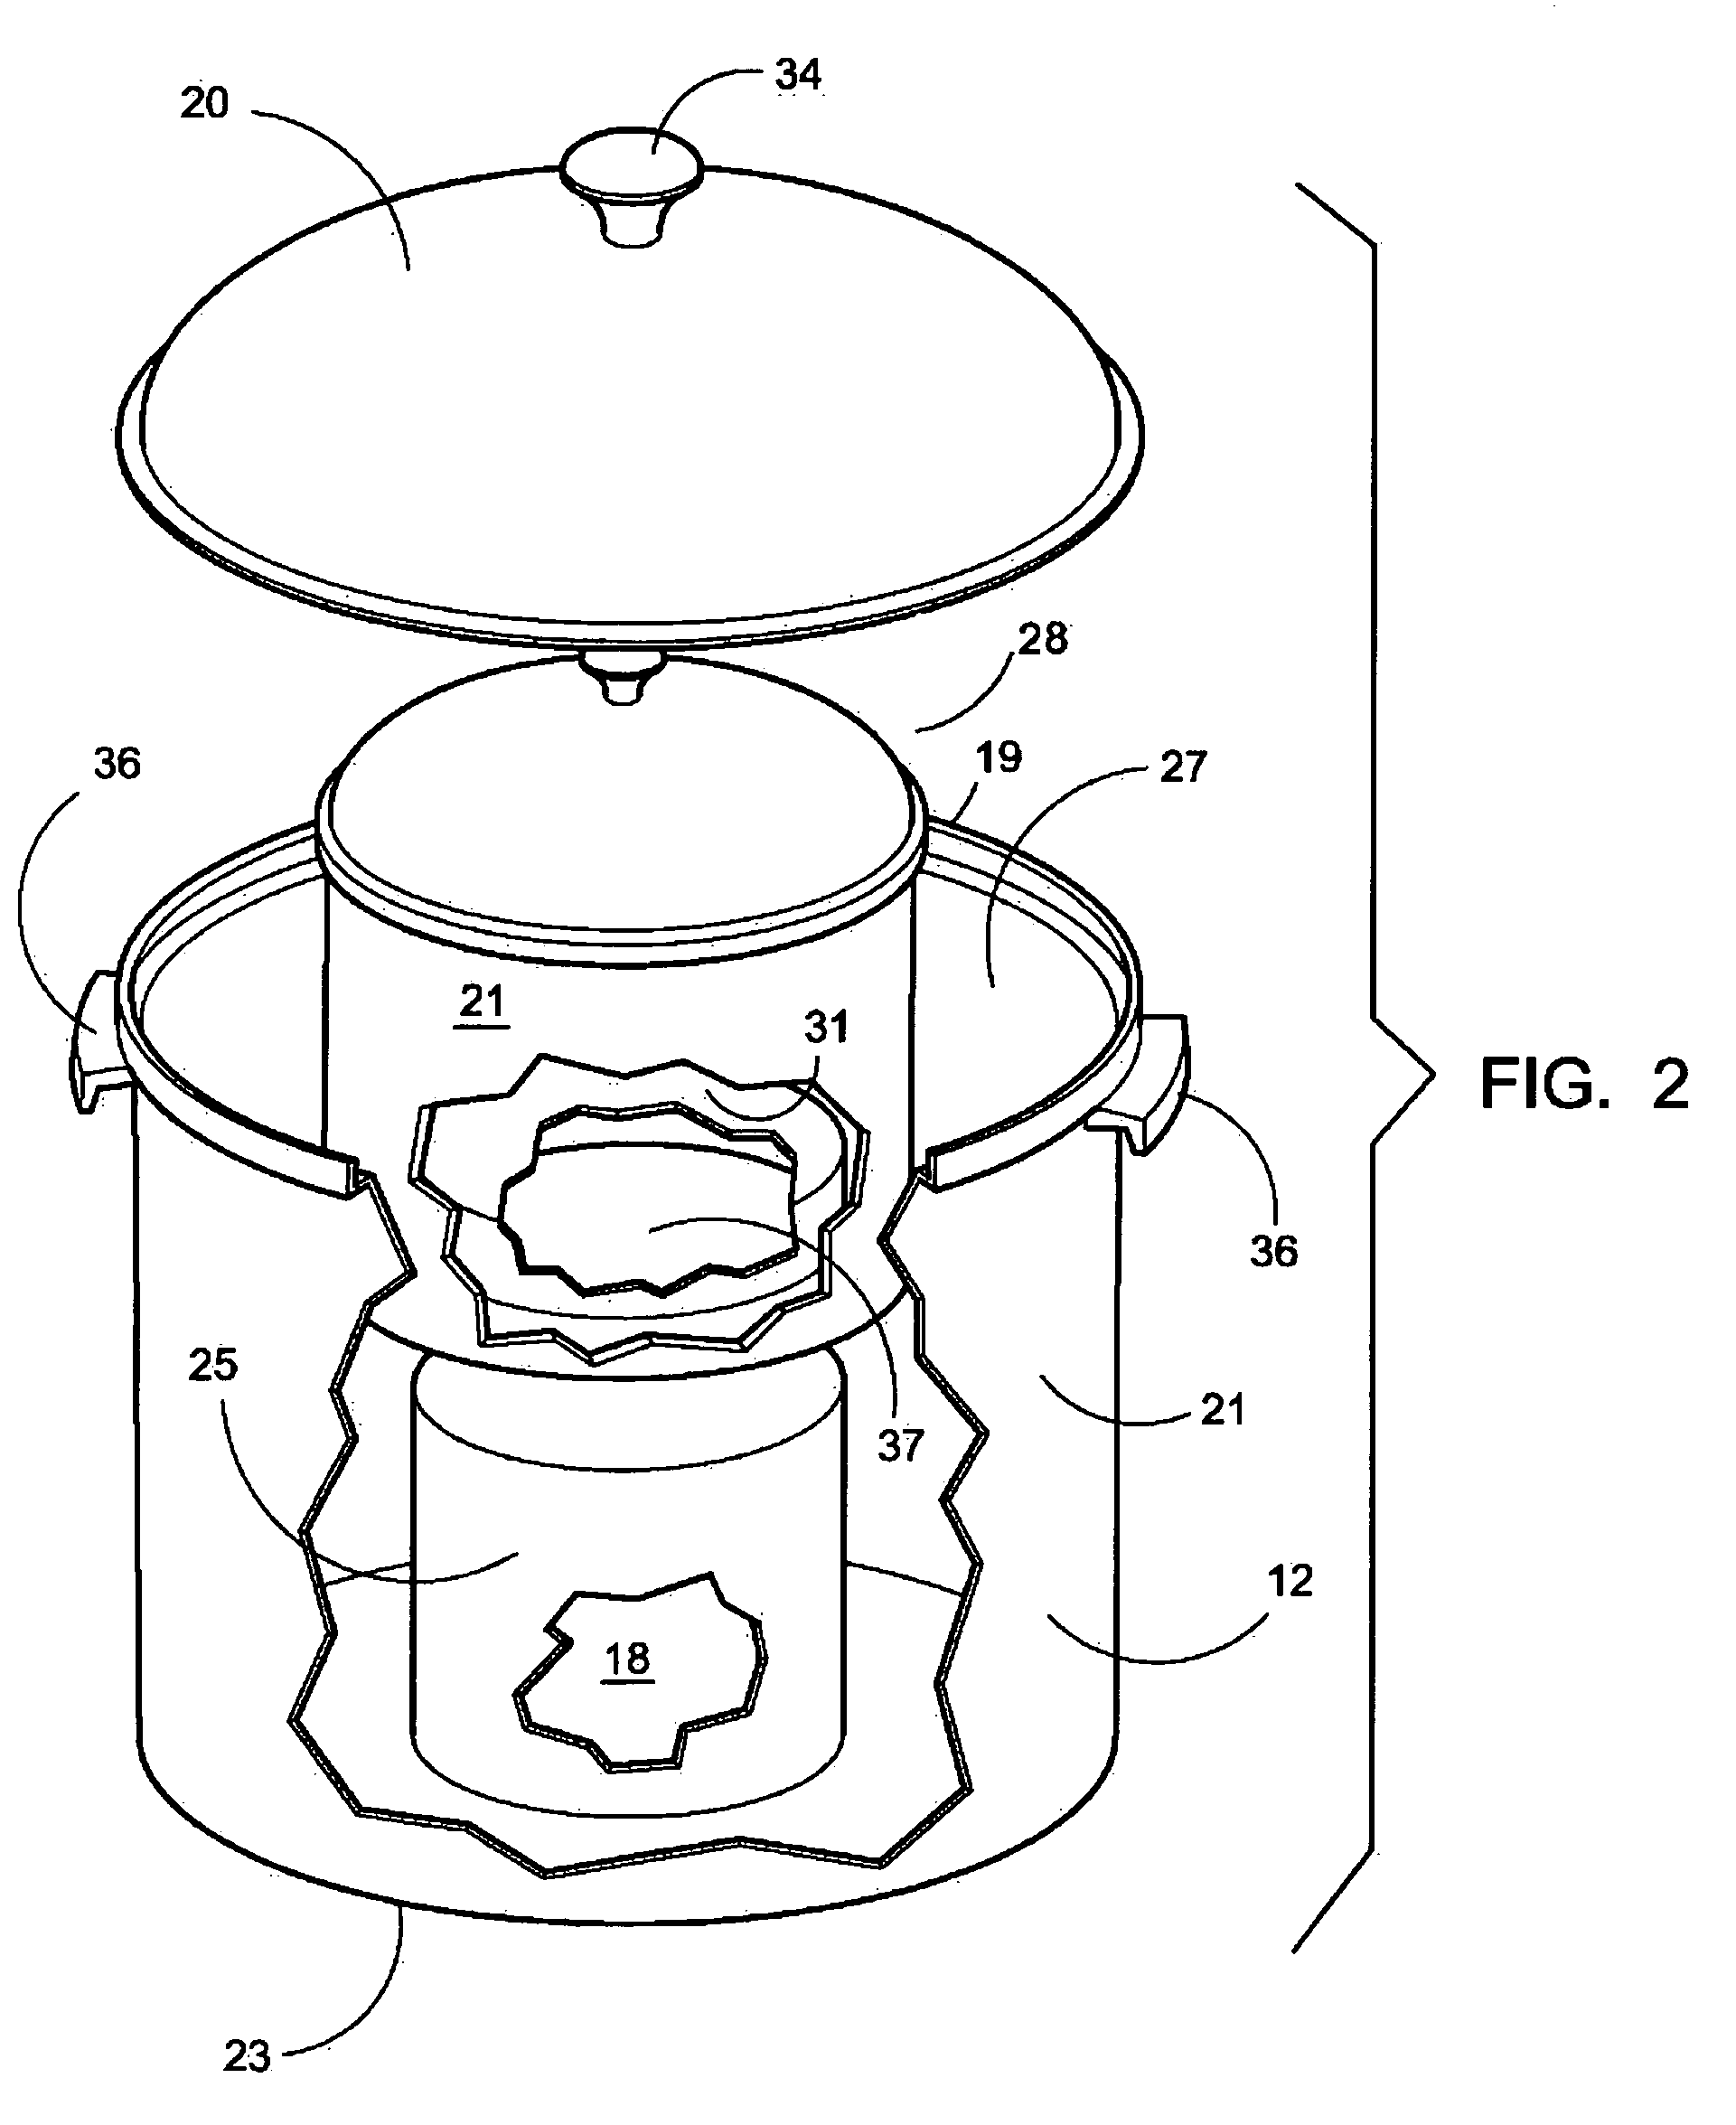 Cooking apparatus employing centrally located heat source